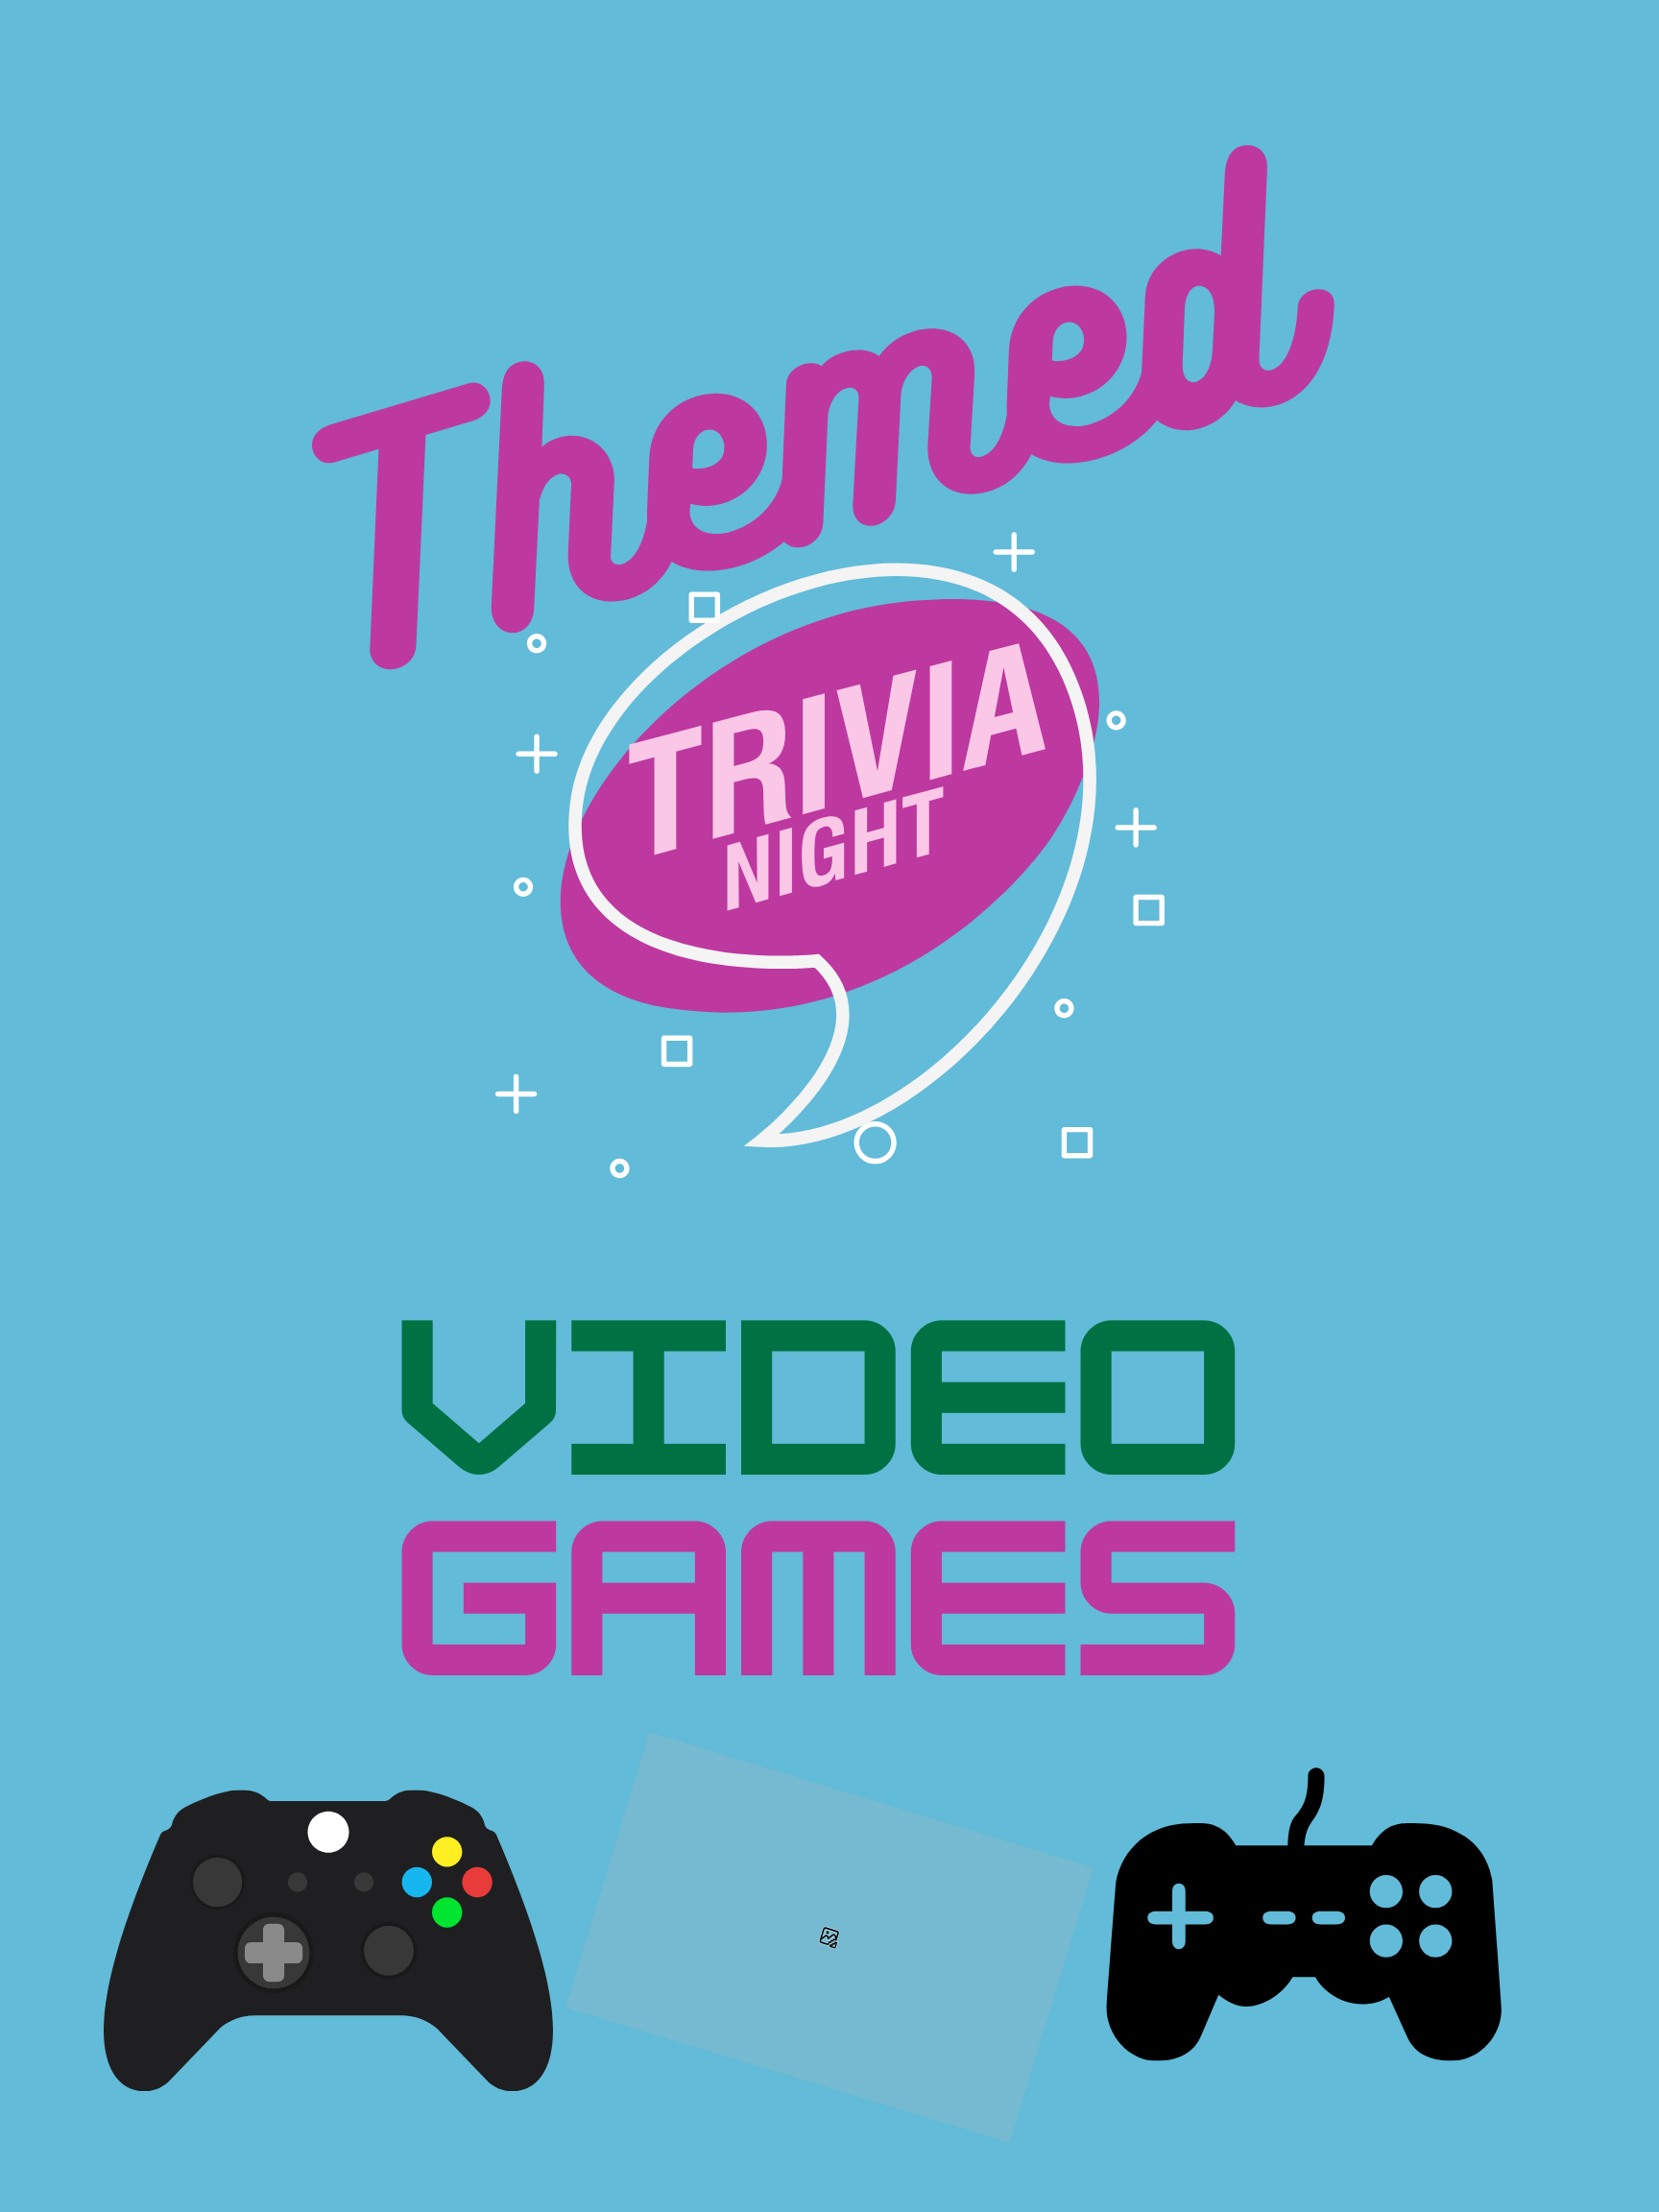 Themed Trivia Video Games 